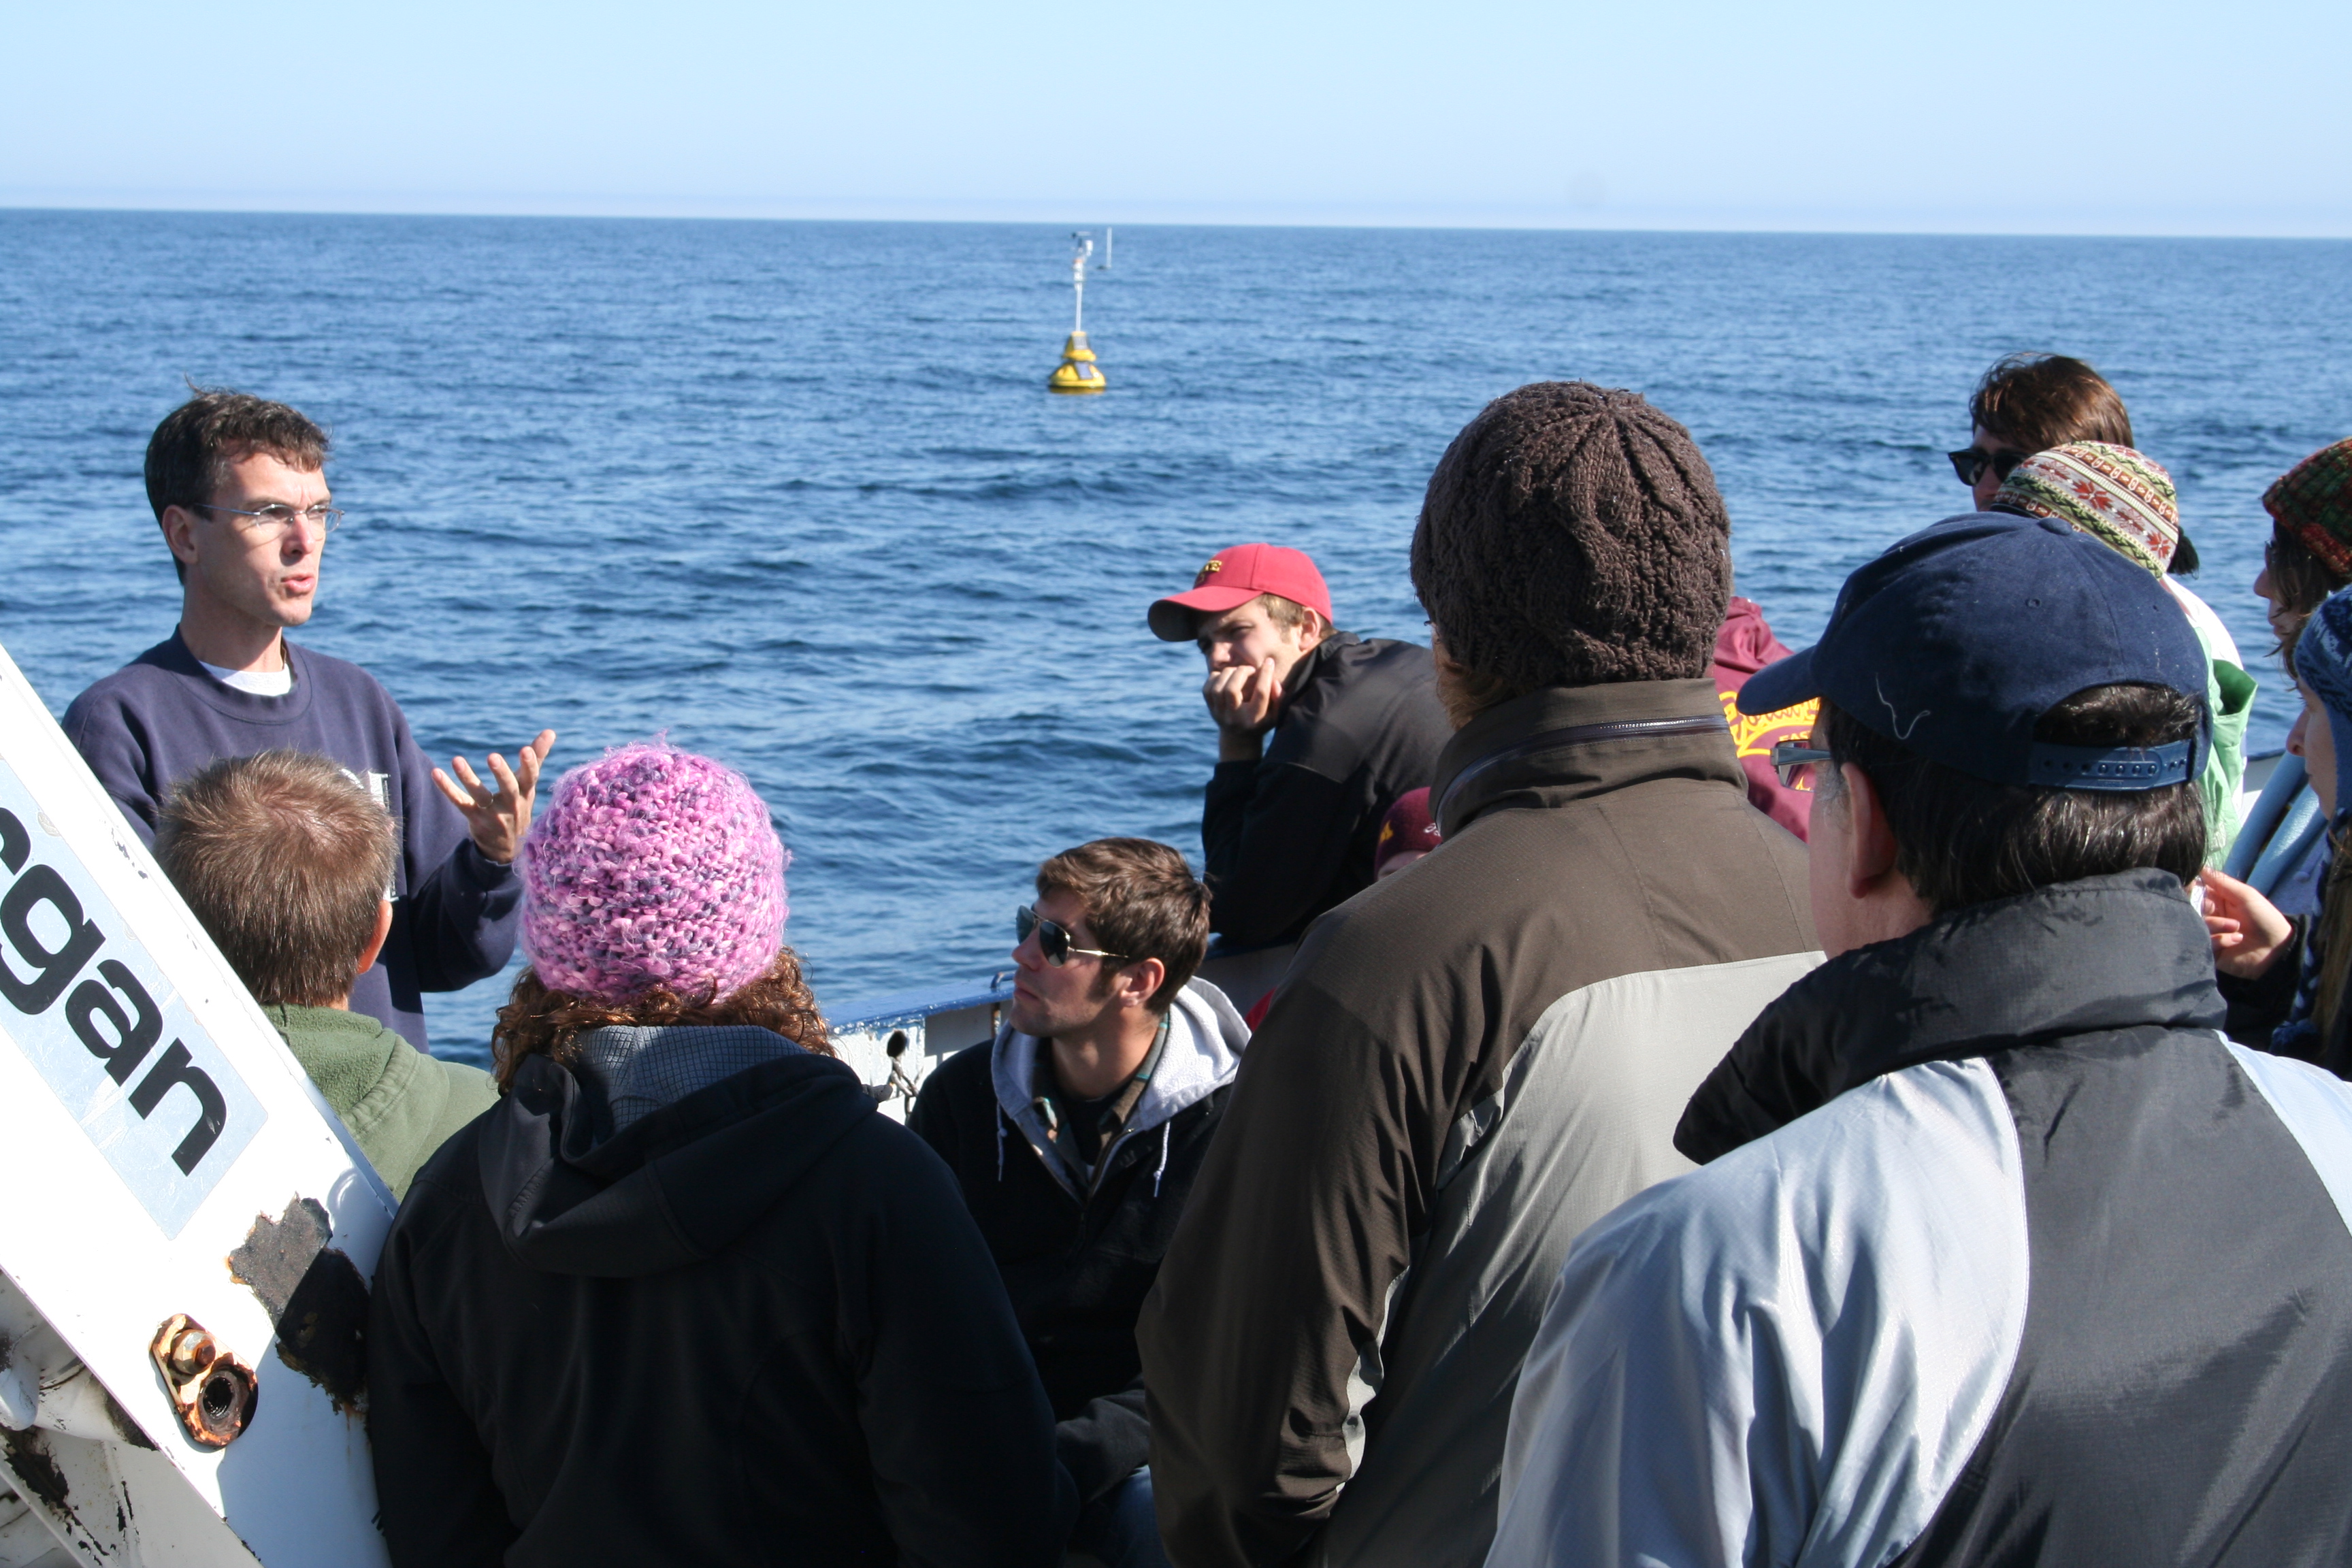 Graduate students hearing from an LLO professor on board the Blue Heron